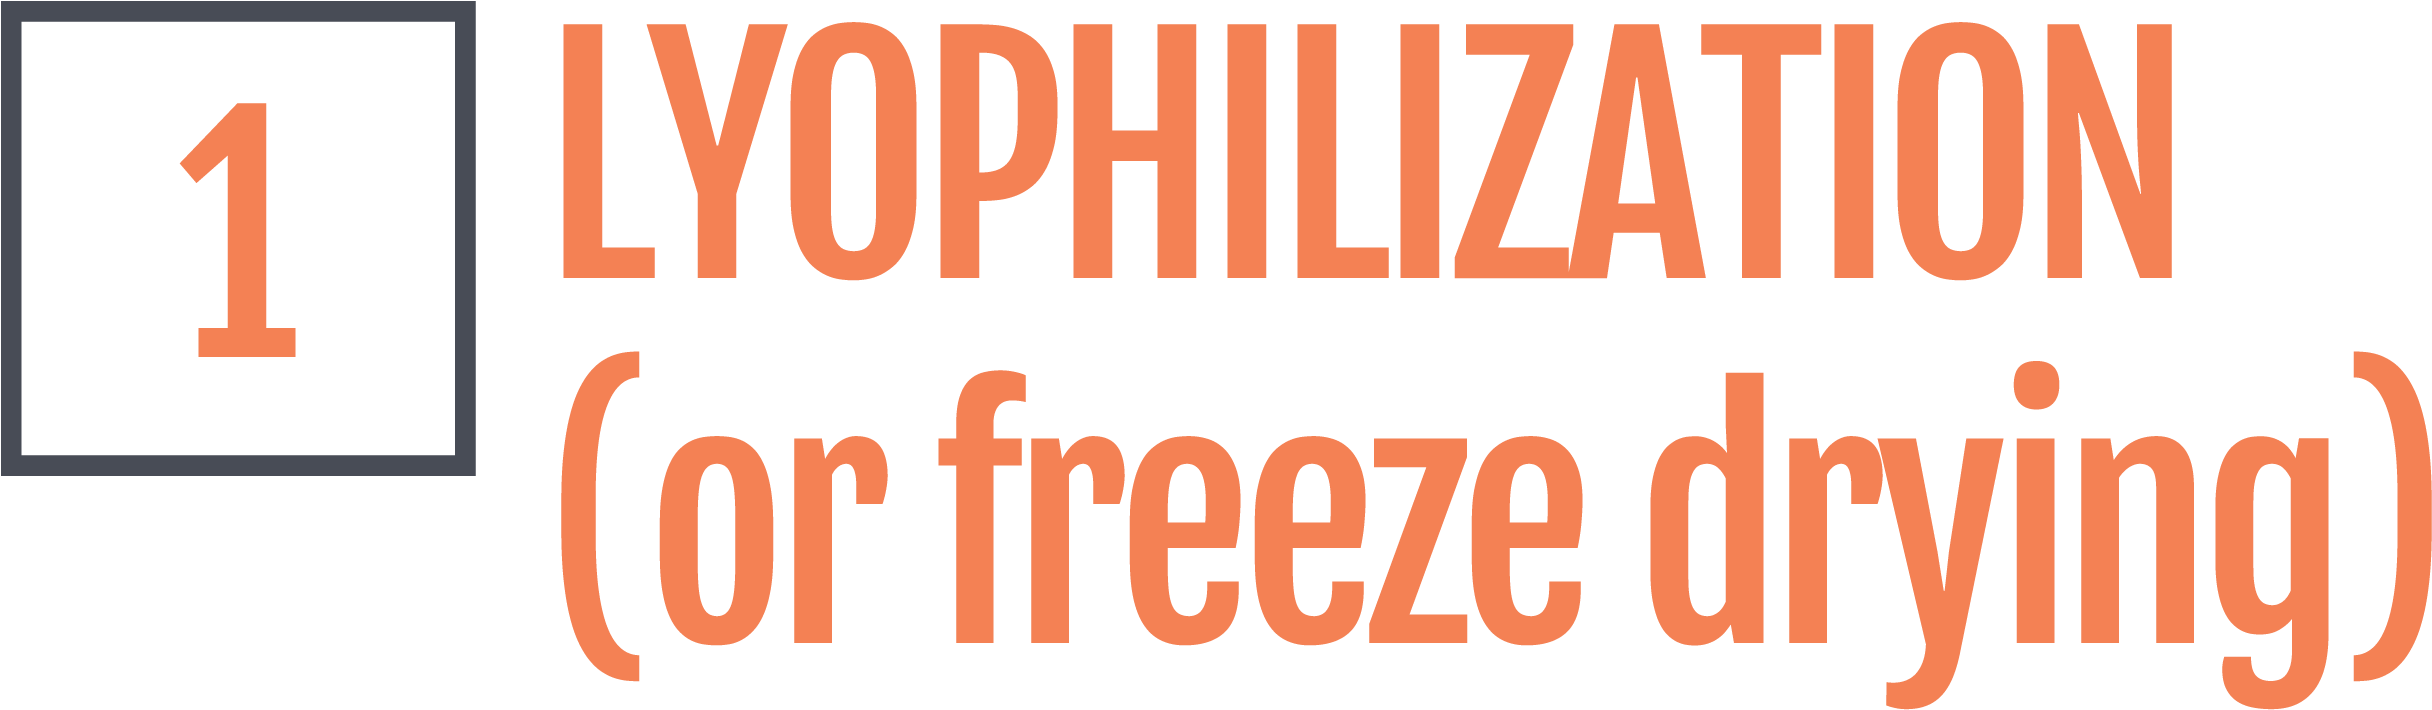 Freeze Dryers Use Deep Vacuum And Heat To Remove Moisture - Poster (2497x768)